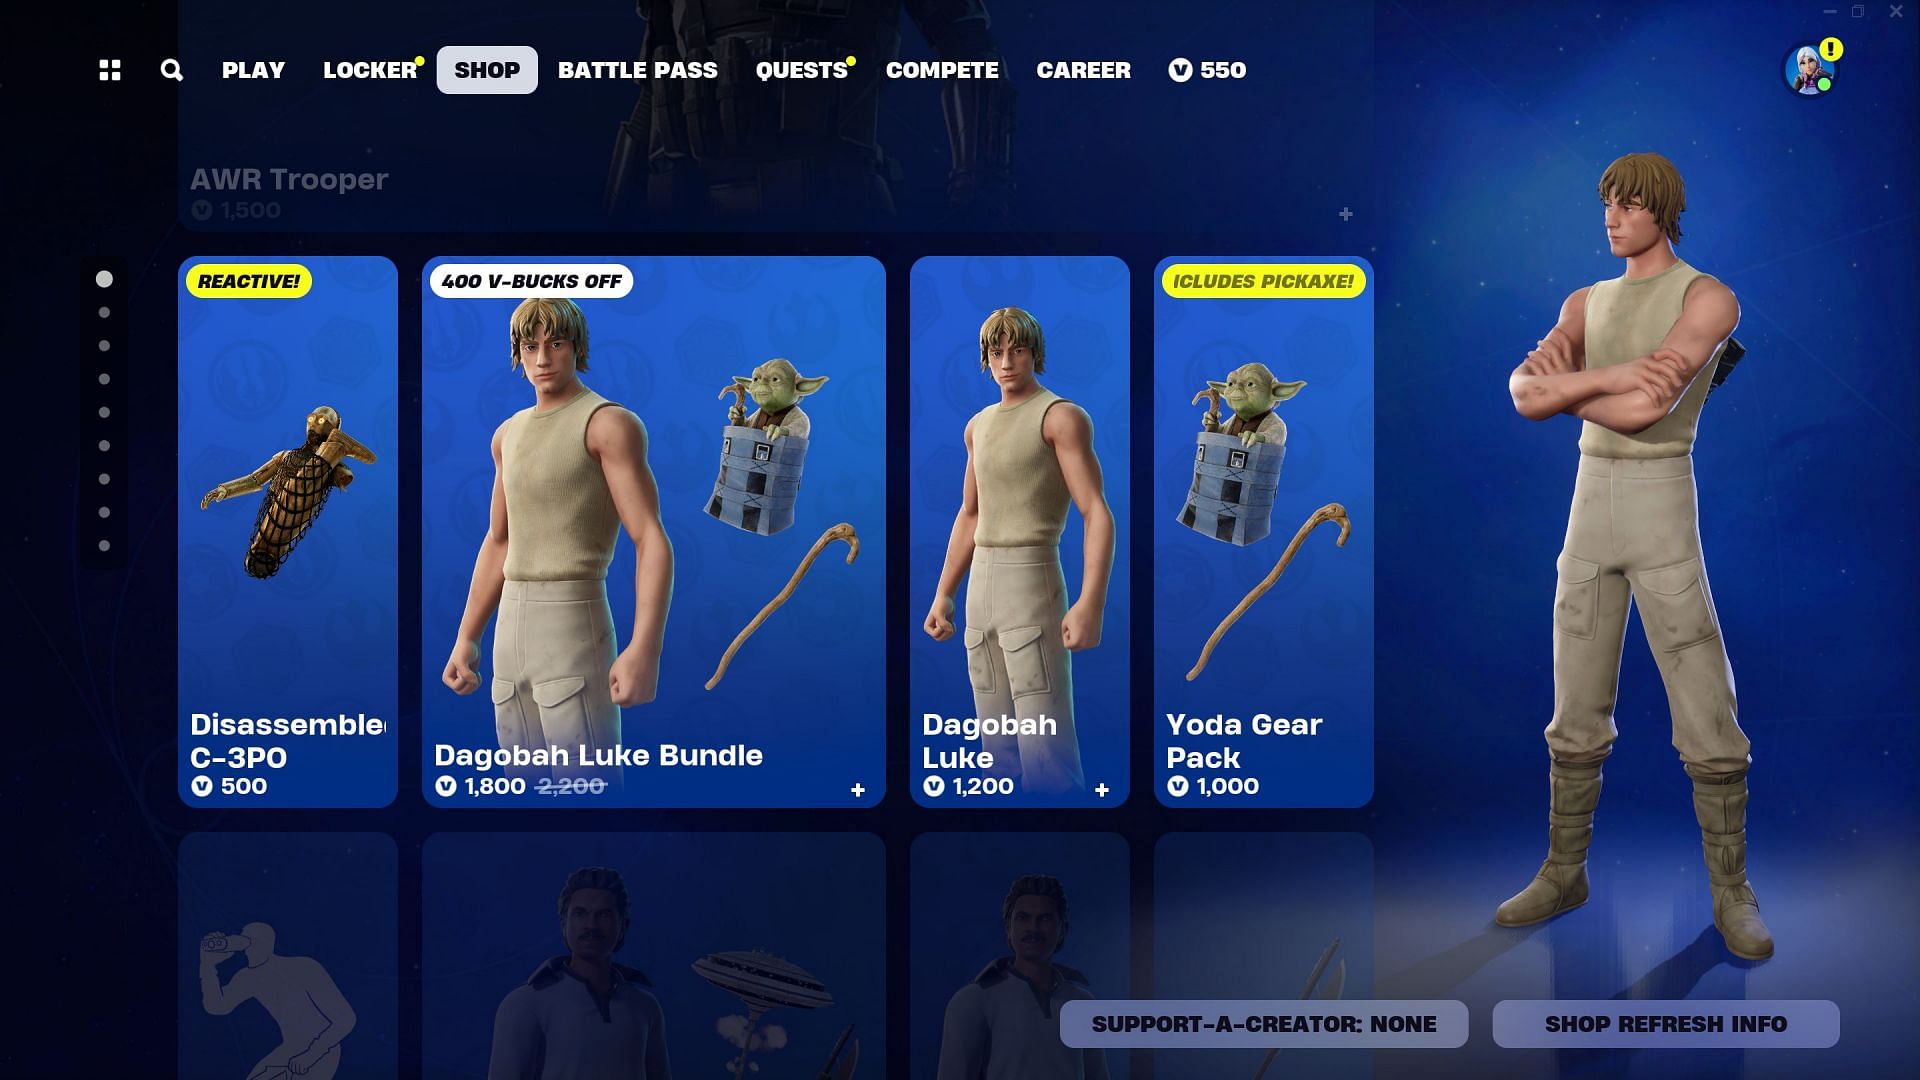 Dagobah Luke skin and Yoda could be listed until the end of Chapter 5 Season 2 (Image via Epic Games)